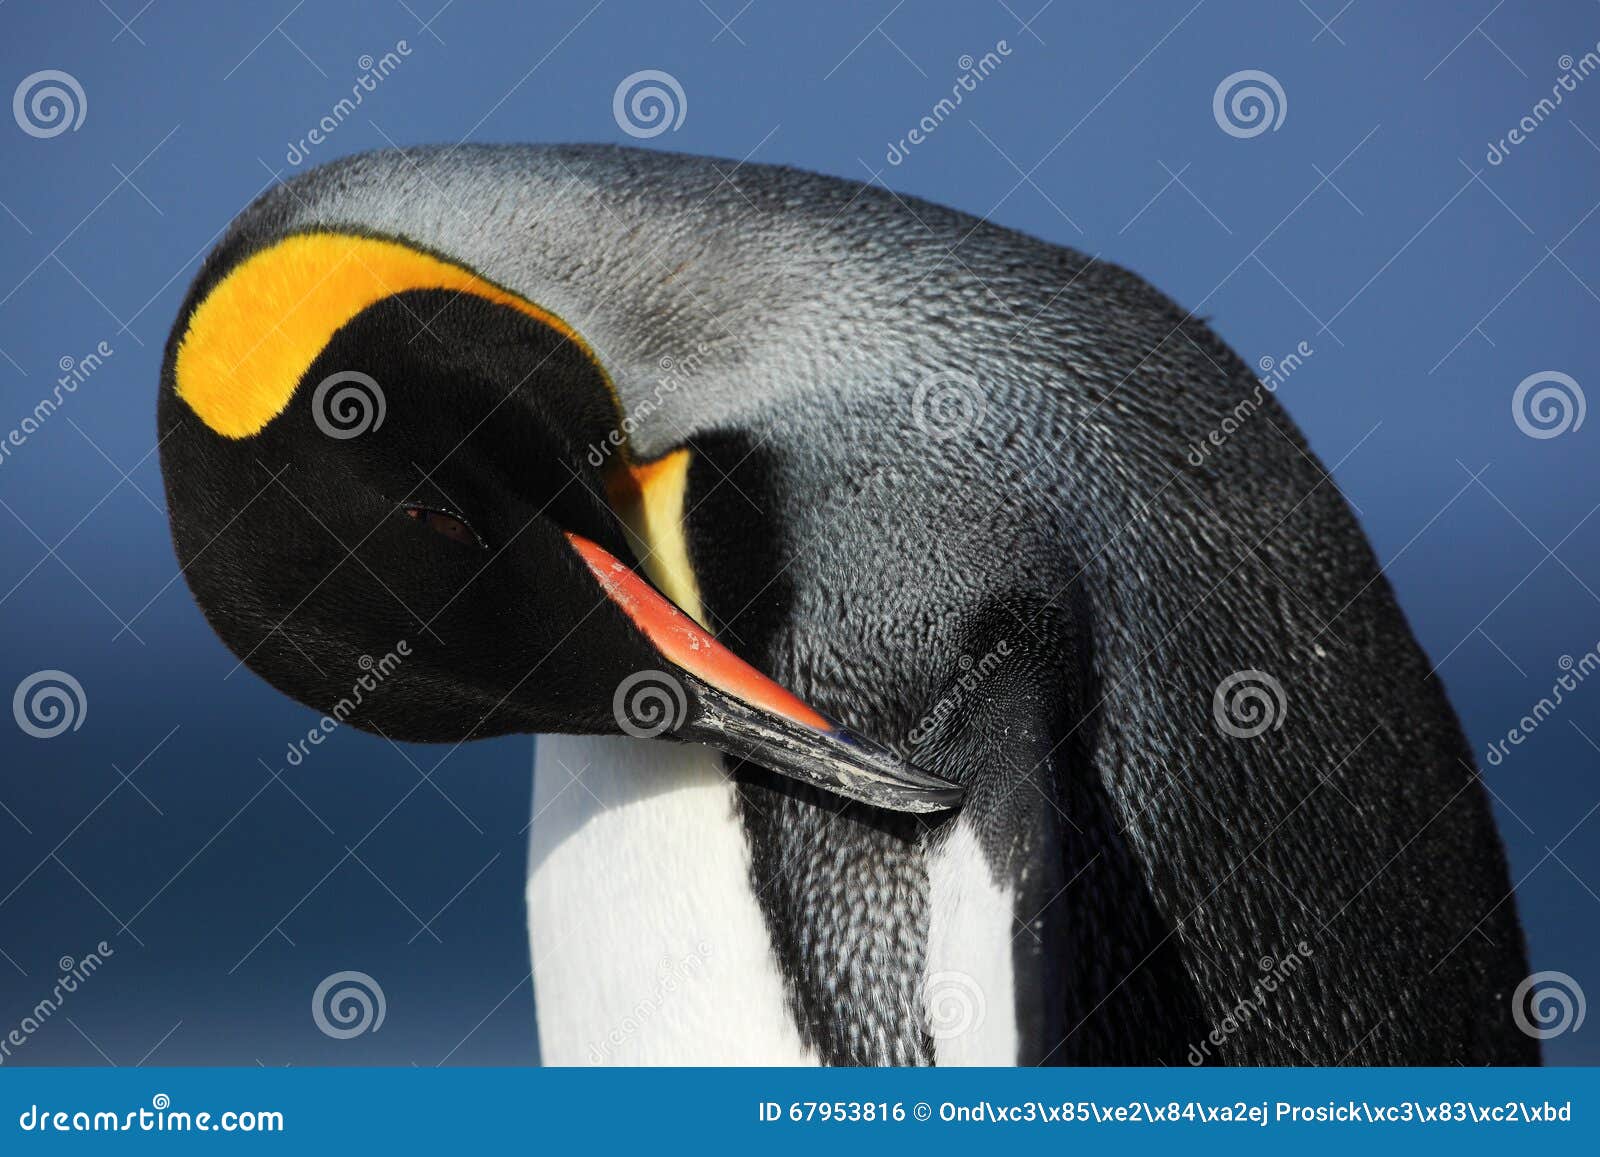 detail portrait of king penguin cleaning plumage in antartica